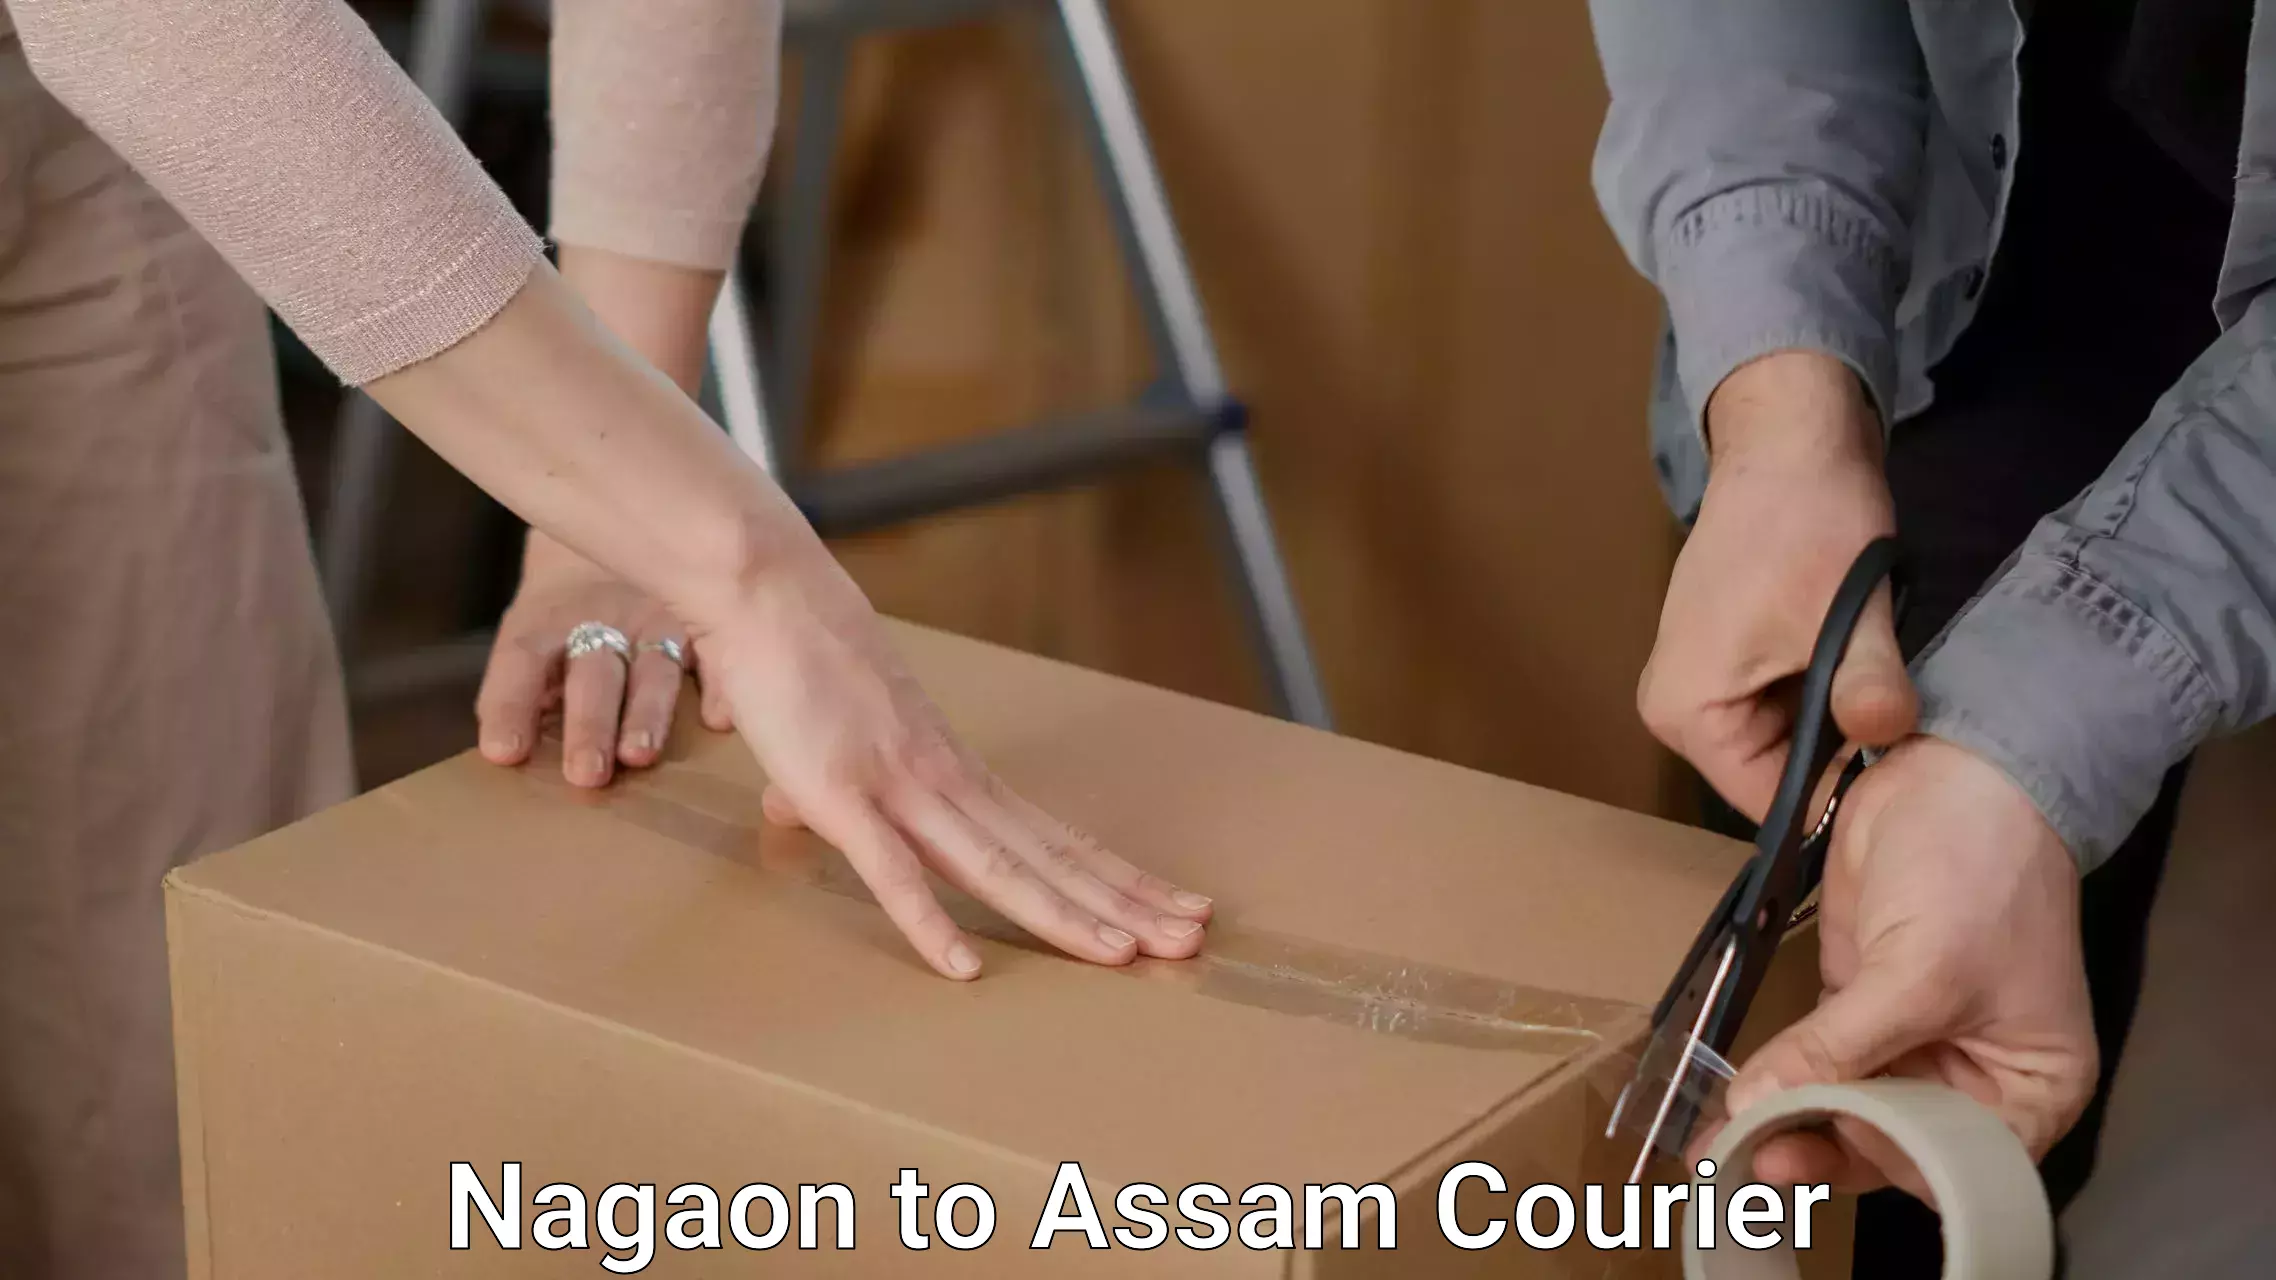 Furniture delivery service in Nagaon to Dhupdhara